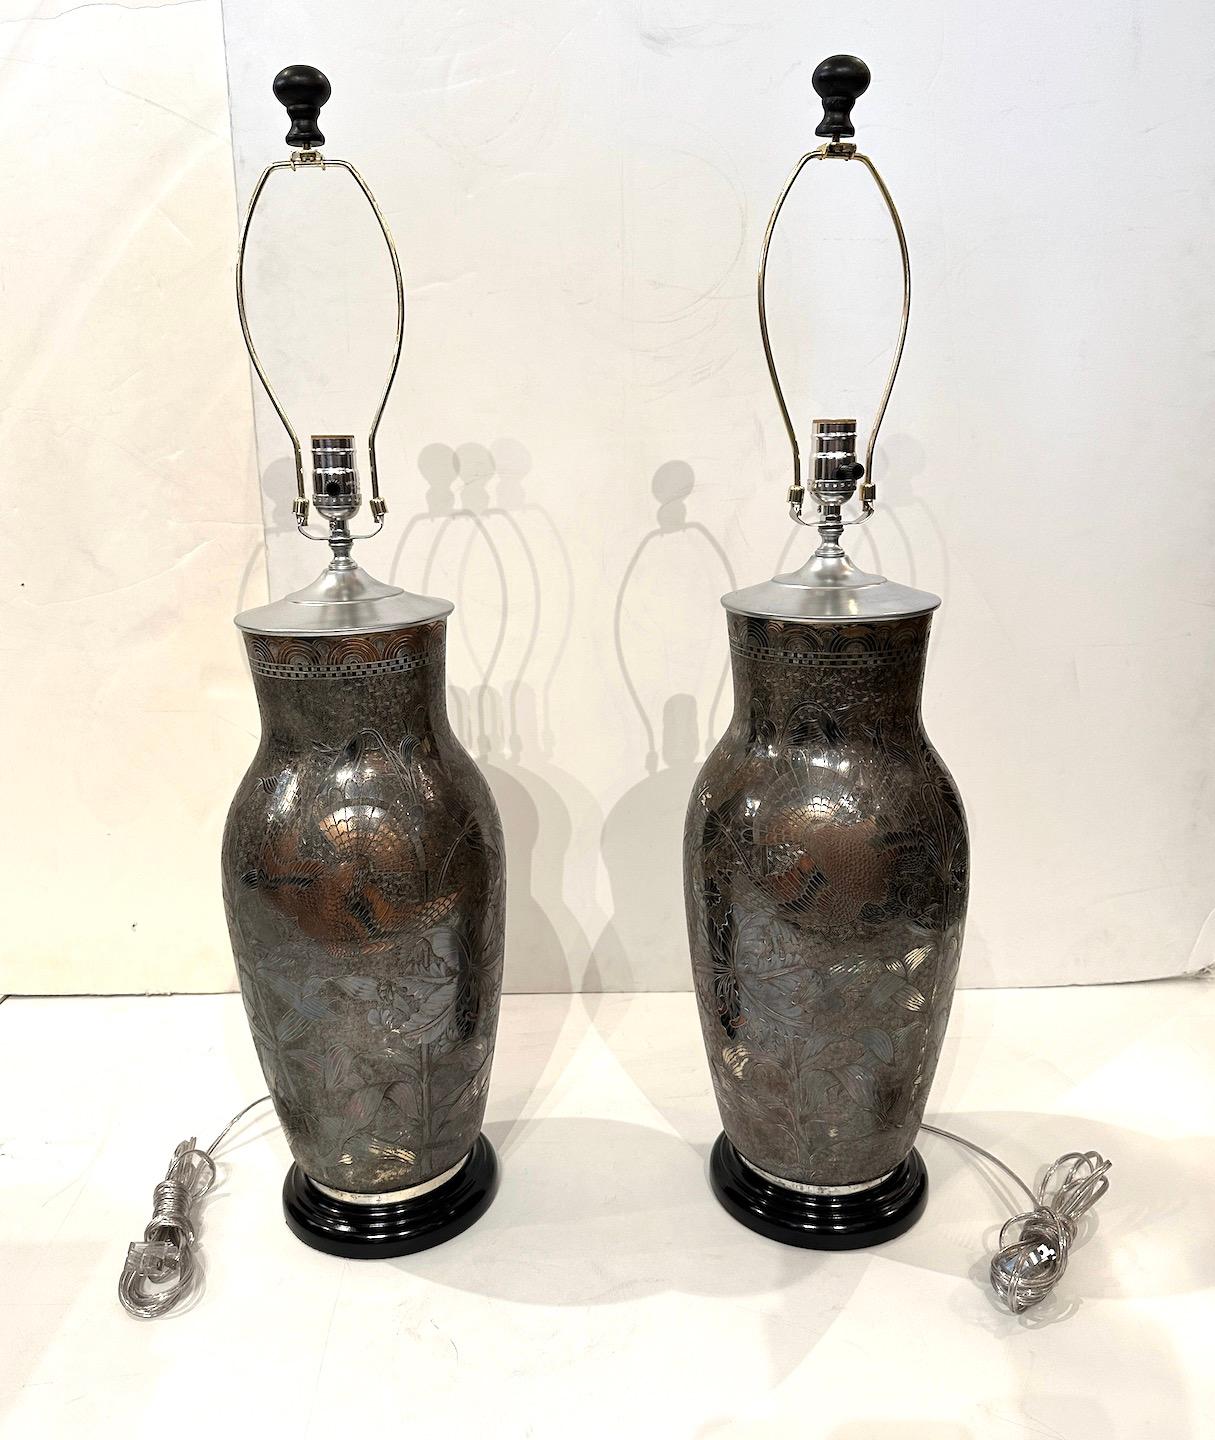 A beautiful pair of silver over copper urns with intricate etched designs of a center bird and floral details later made into lamps.  Single bulb, painted wood base.  Lamps are 32.5